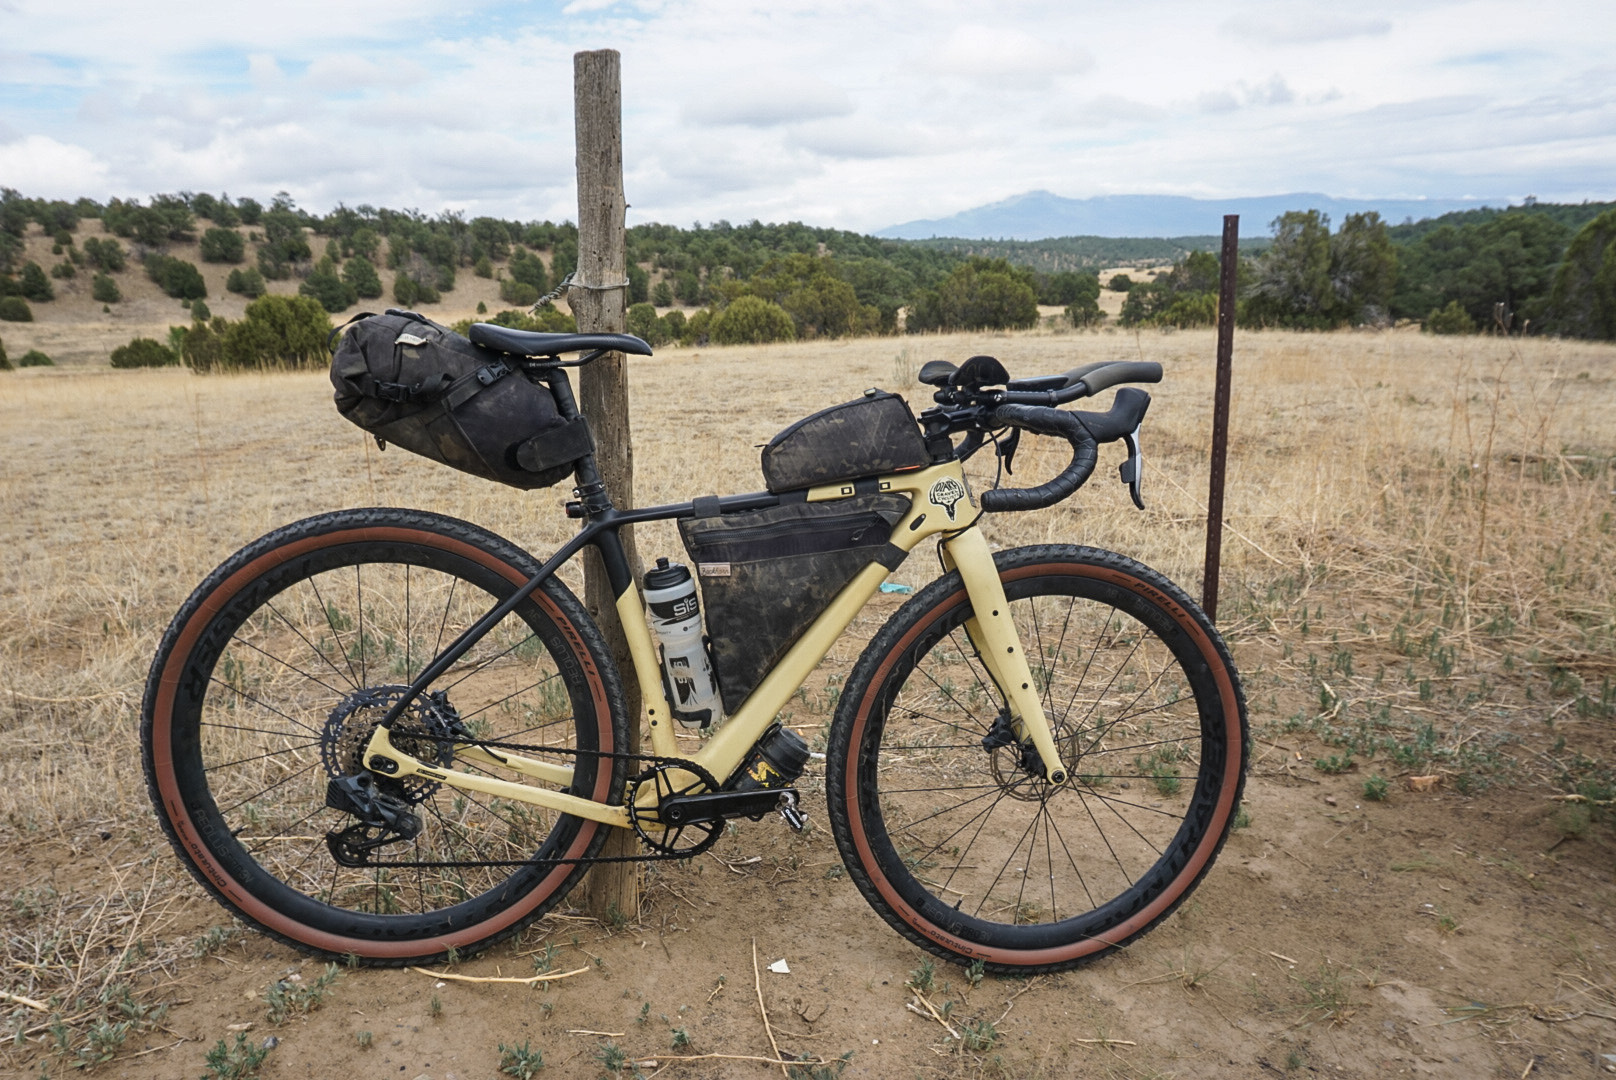 Andrew Onermaa reflects on winning the North South Colorado 2022 bikepacking race on his Otso Cycles Waheela C.